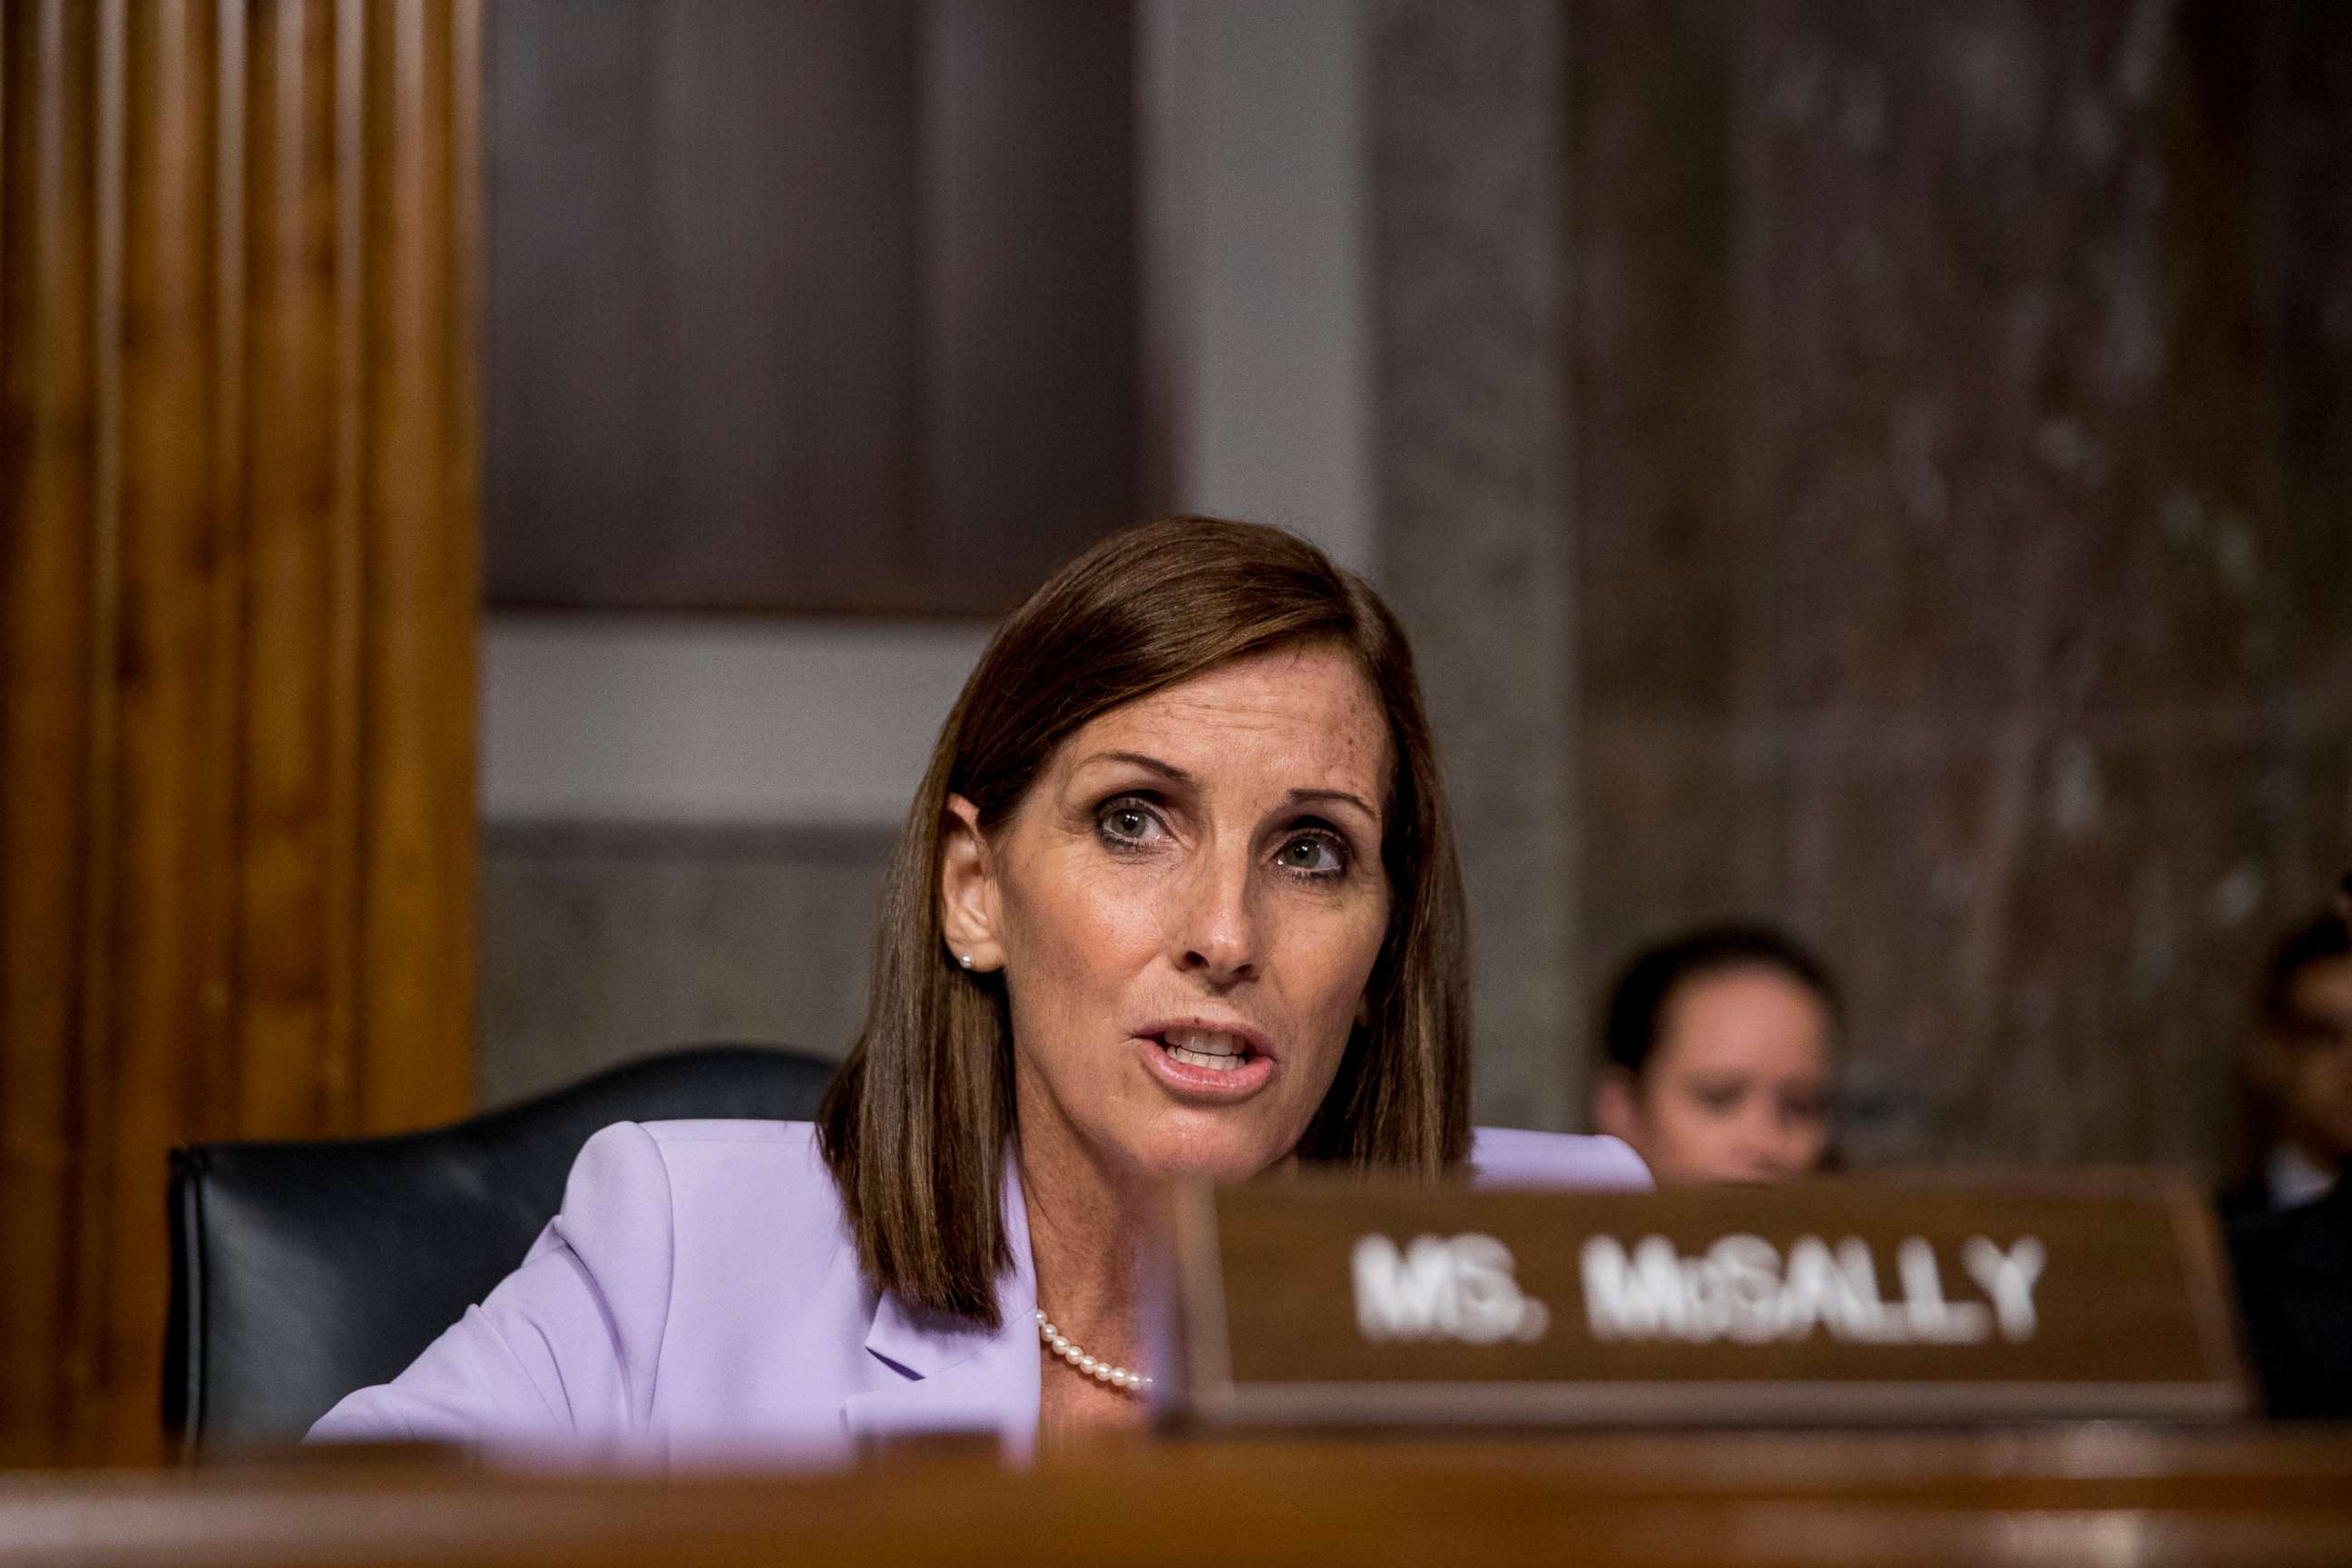 PHOTO: Sen. Martha McSally, R-Ariz., speaks during a Senate Armed Services Committee hearing on Capitol Hill in Washington, Tuesday, July 30, 2019, for the confirmation hearing of Gen. John Hyten to be Vice Chairman of the Joint Chiefs of Staff.